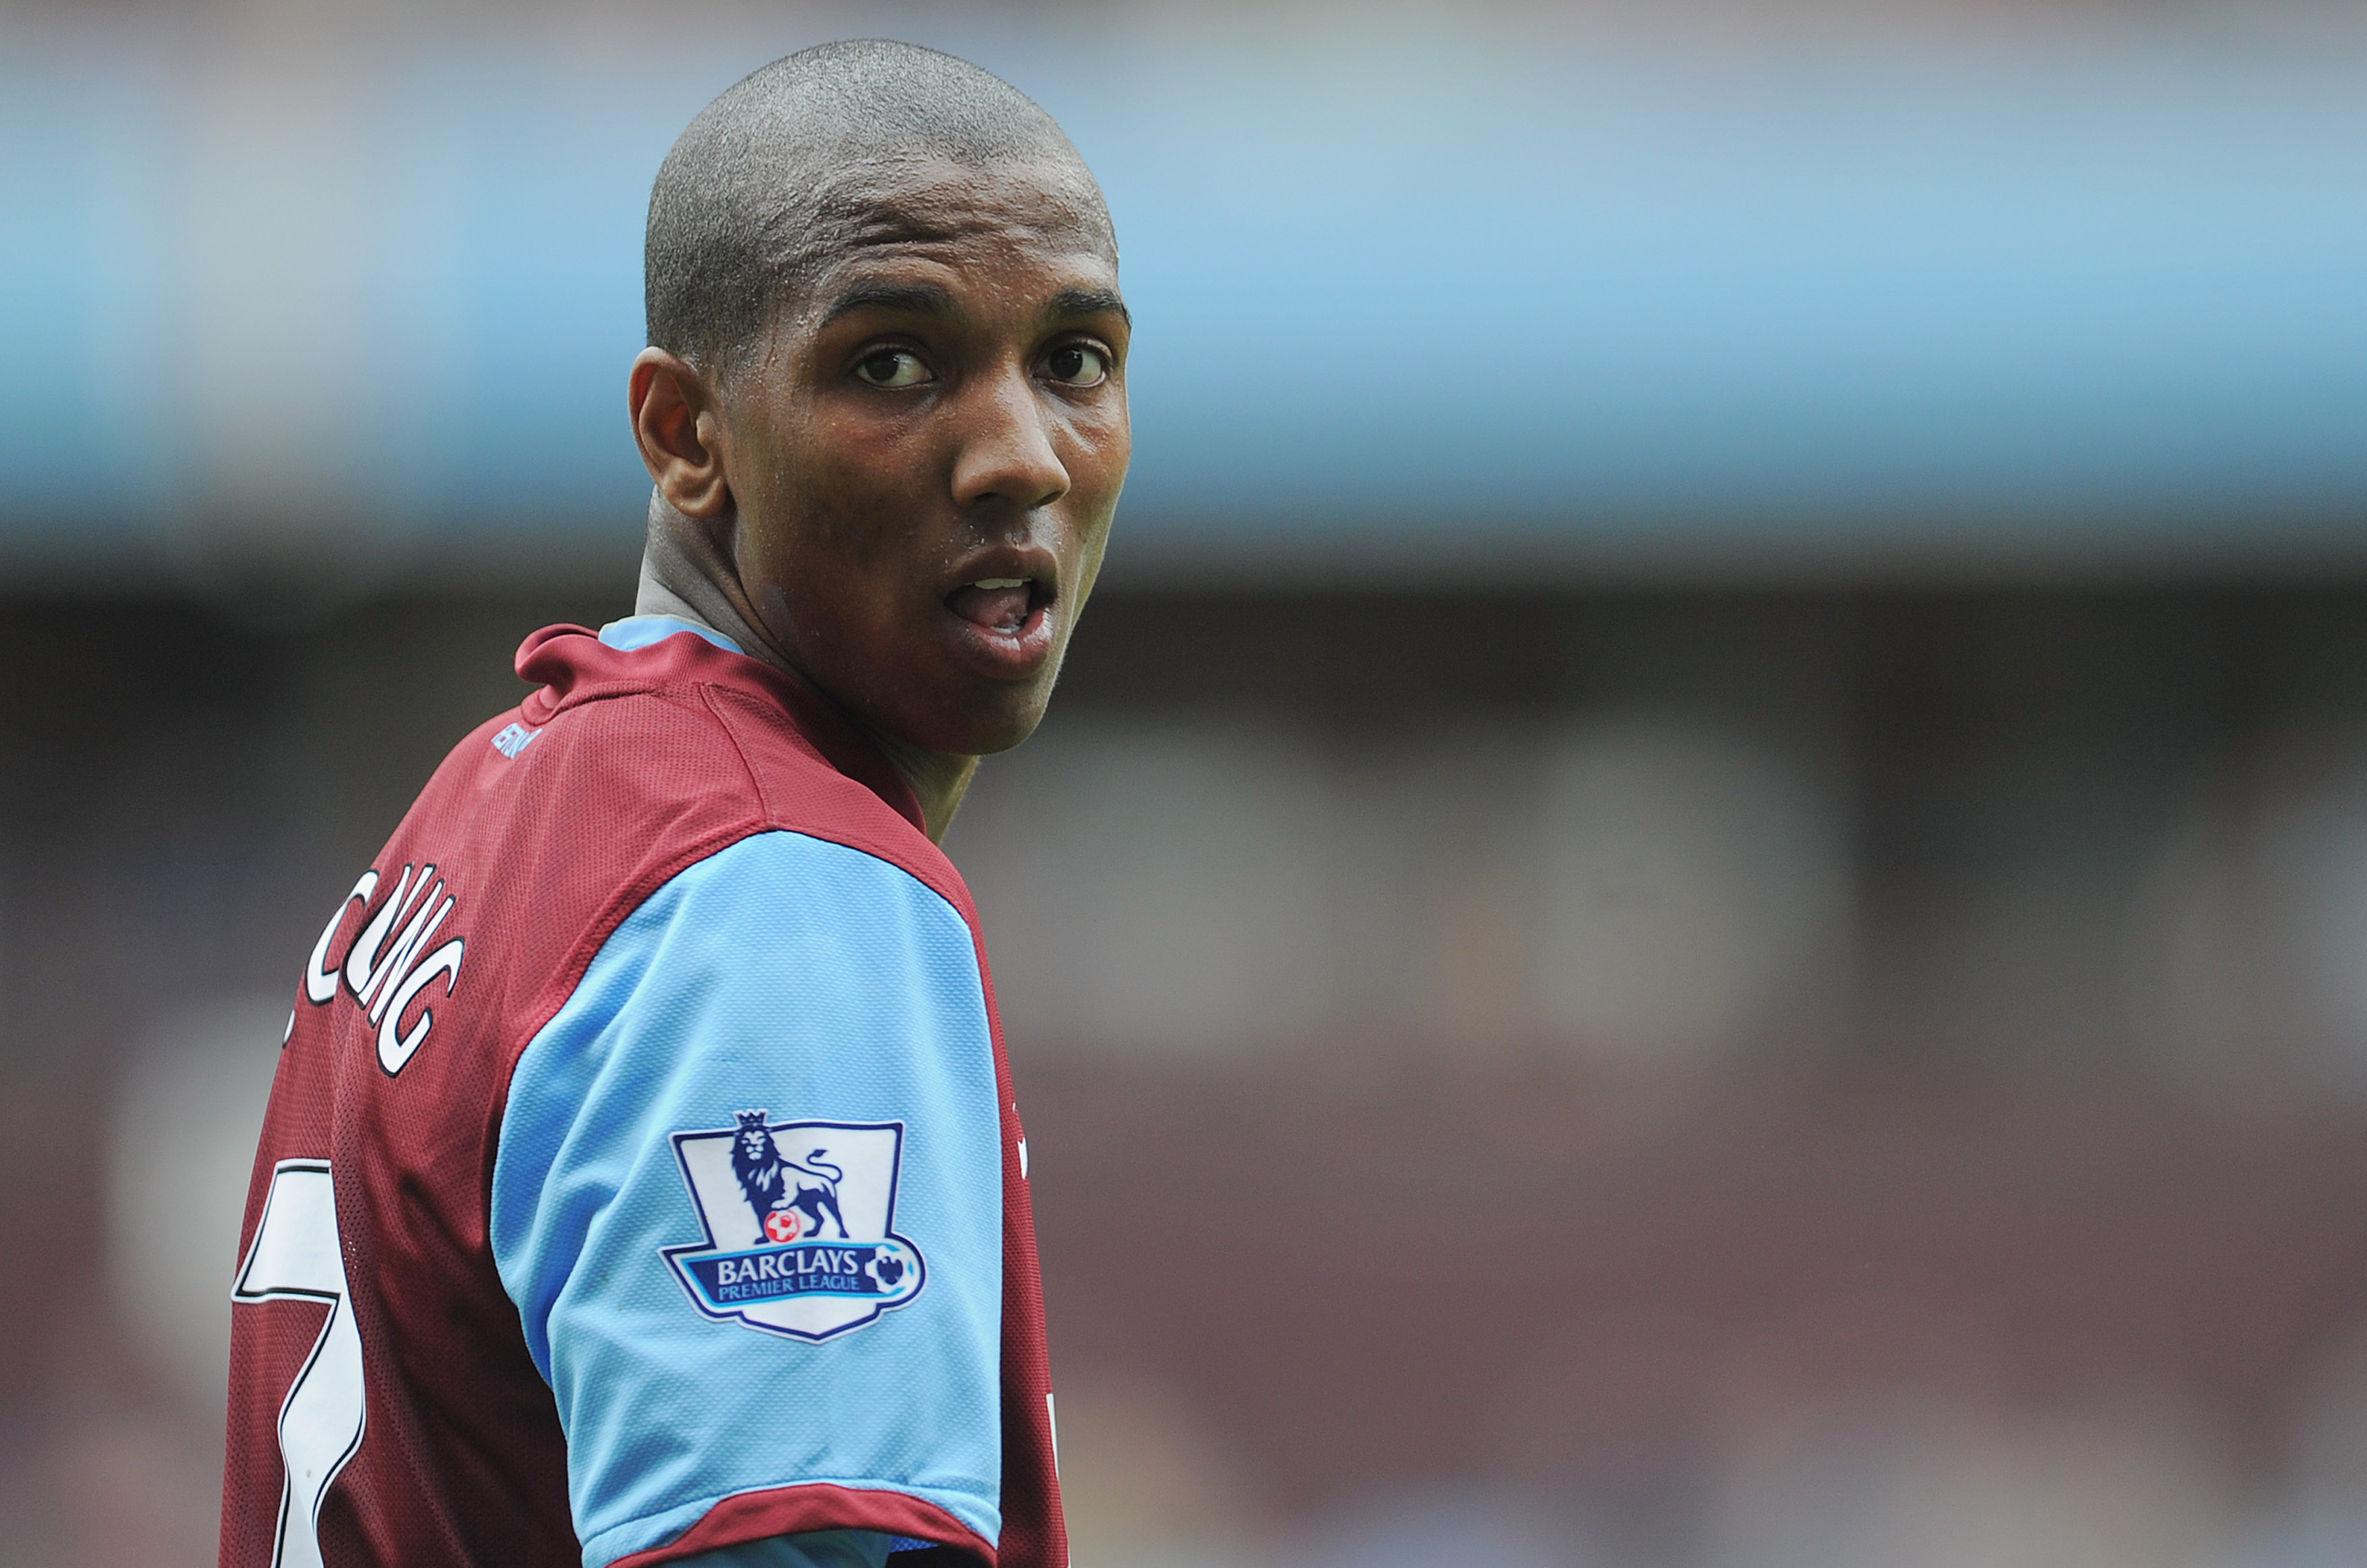 BIRMINGHAM, ENGLAND - MAY 07: Ashley Young of Villa looks on during the Barclays Premier League match between Aston Villa and Wigan Athletic on May 7, 2011 in Birmingham, England.  (Photo by Michael Regan/Getty Images)